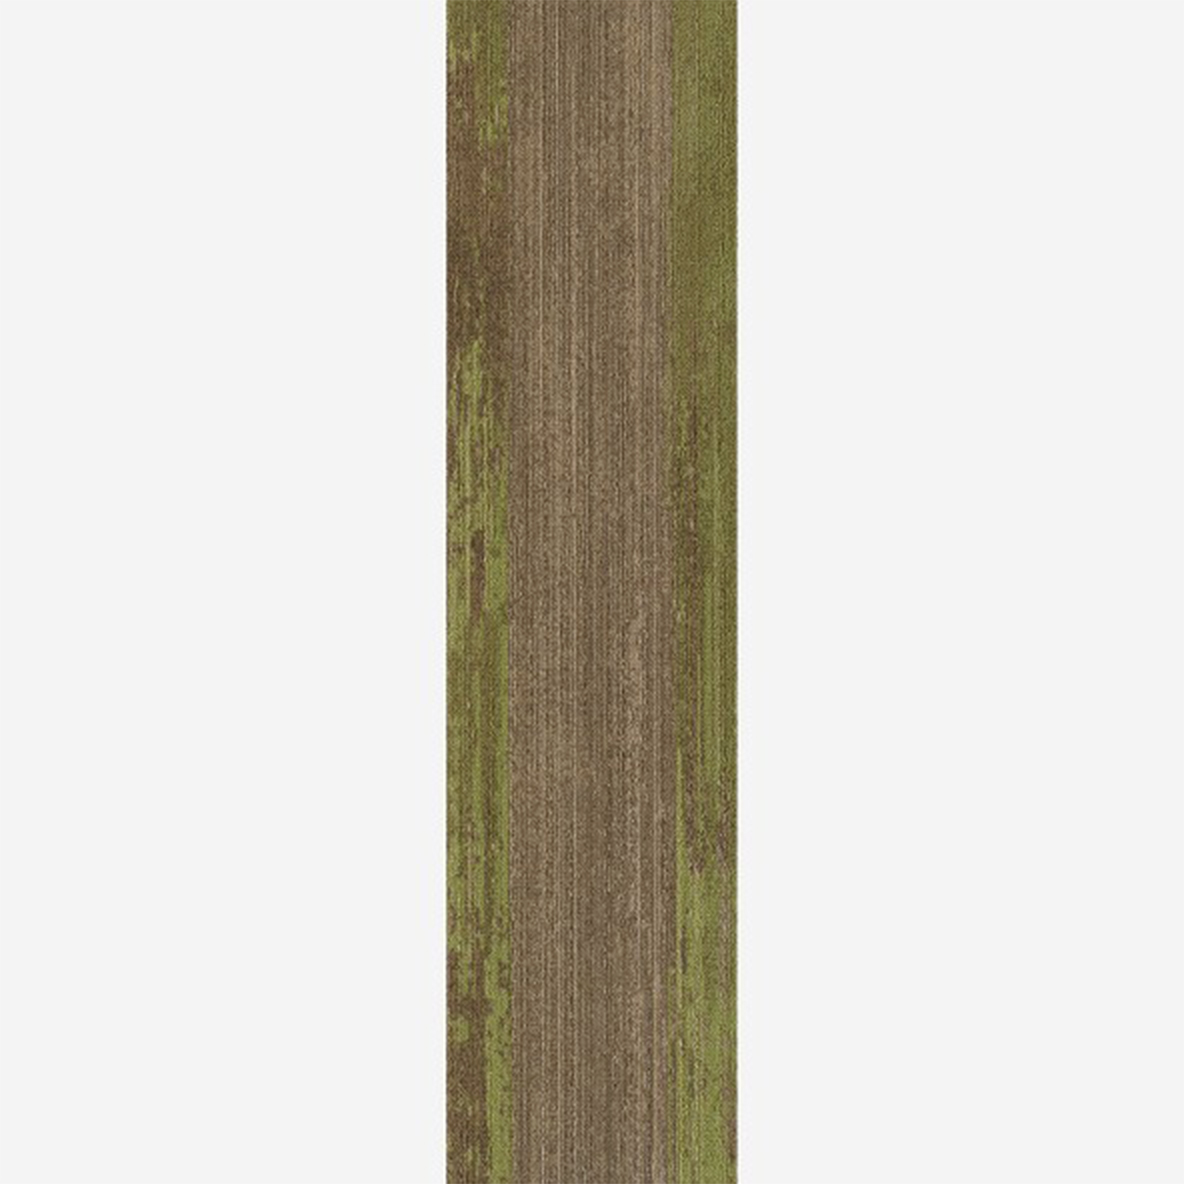 Ingrained Commercial Carpet Plank Colors .28 Inch x 25 cm x 1 Meter Per Plank Beech Grass full